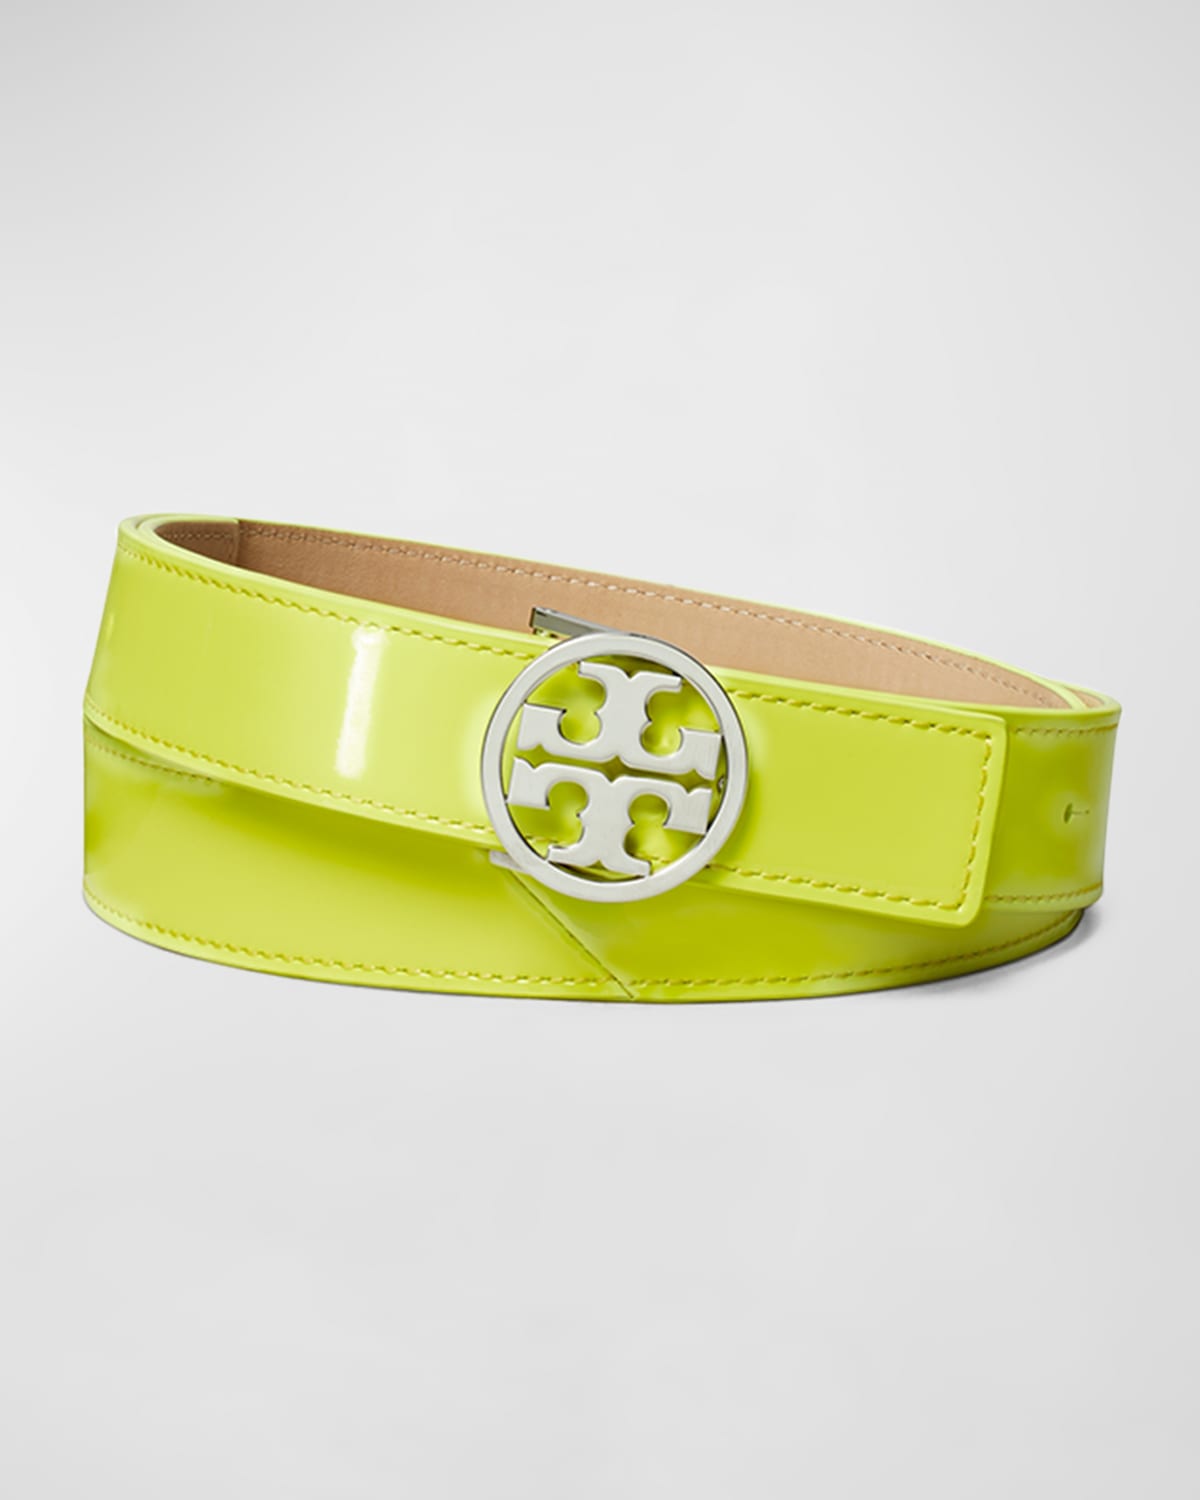 TORY BURCH MILLER PATENT LEATHER BELT